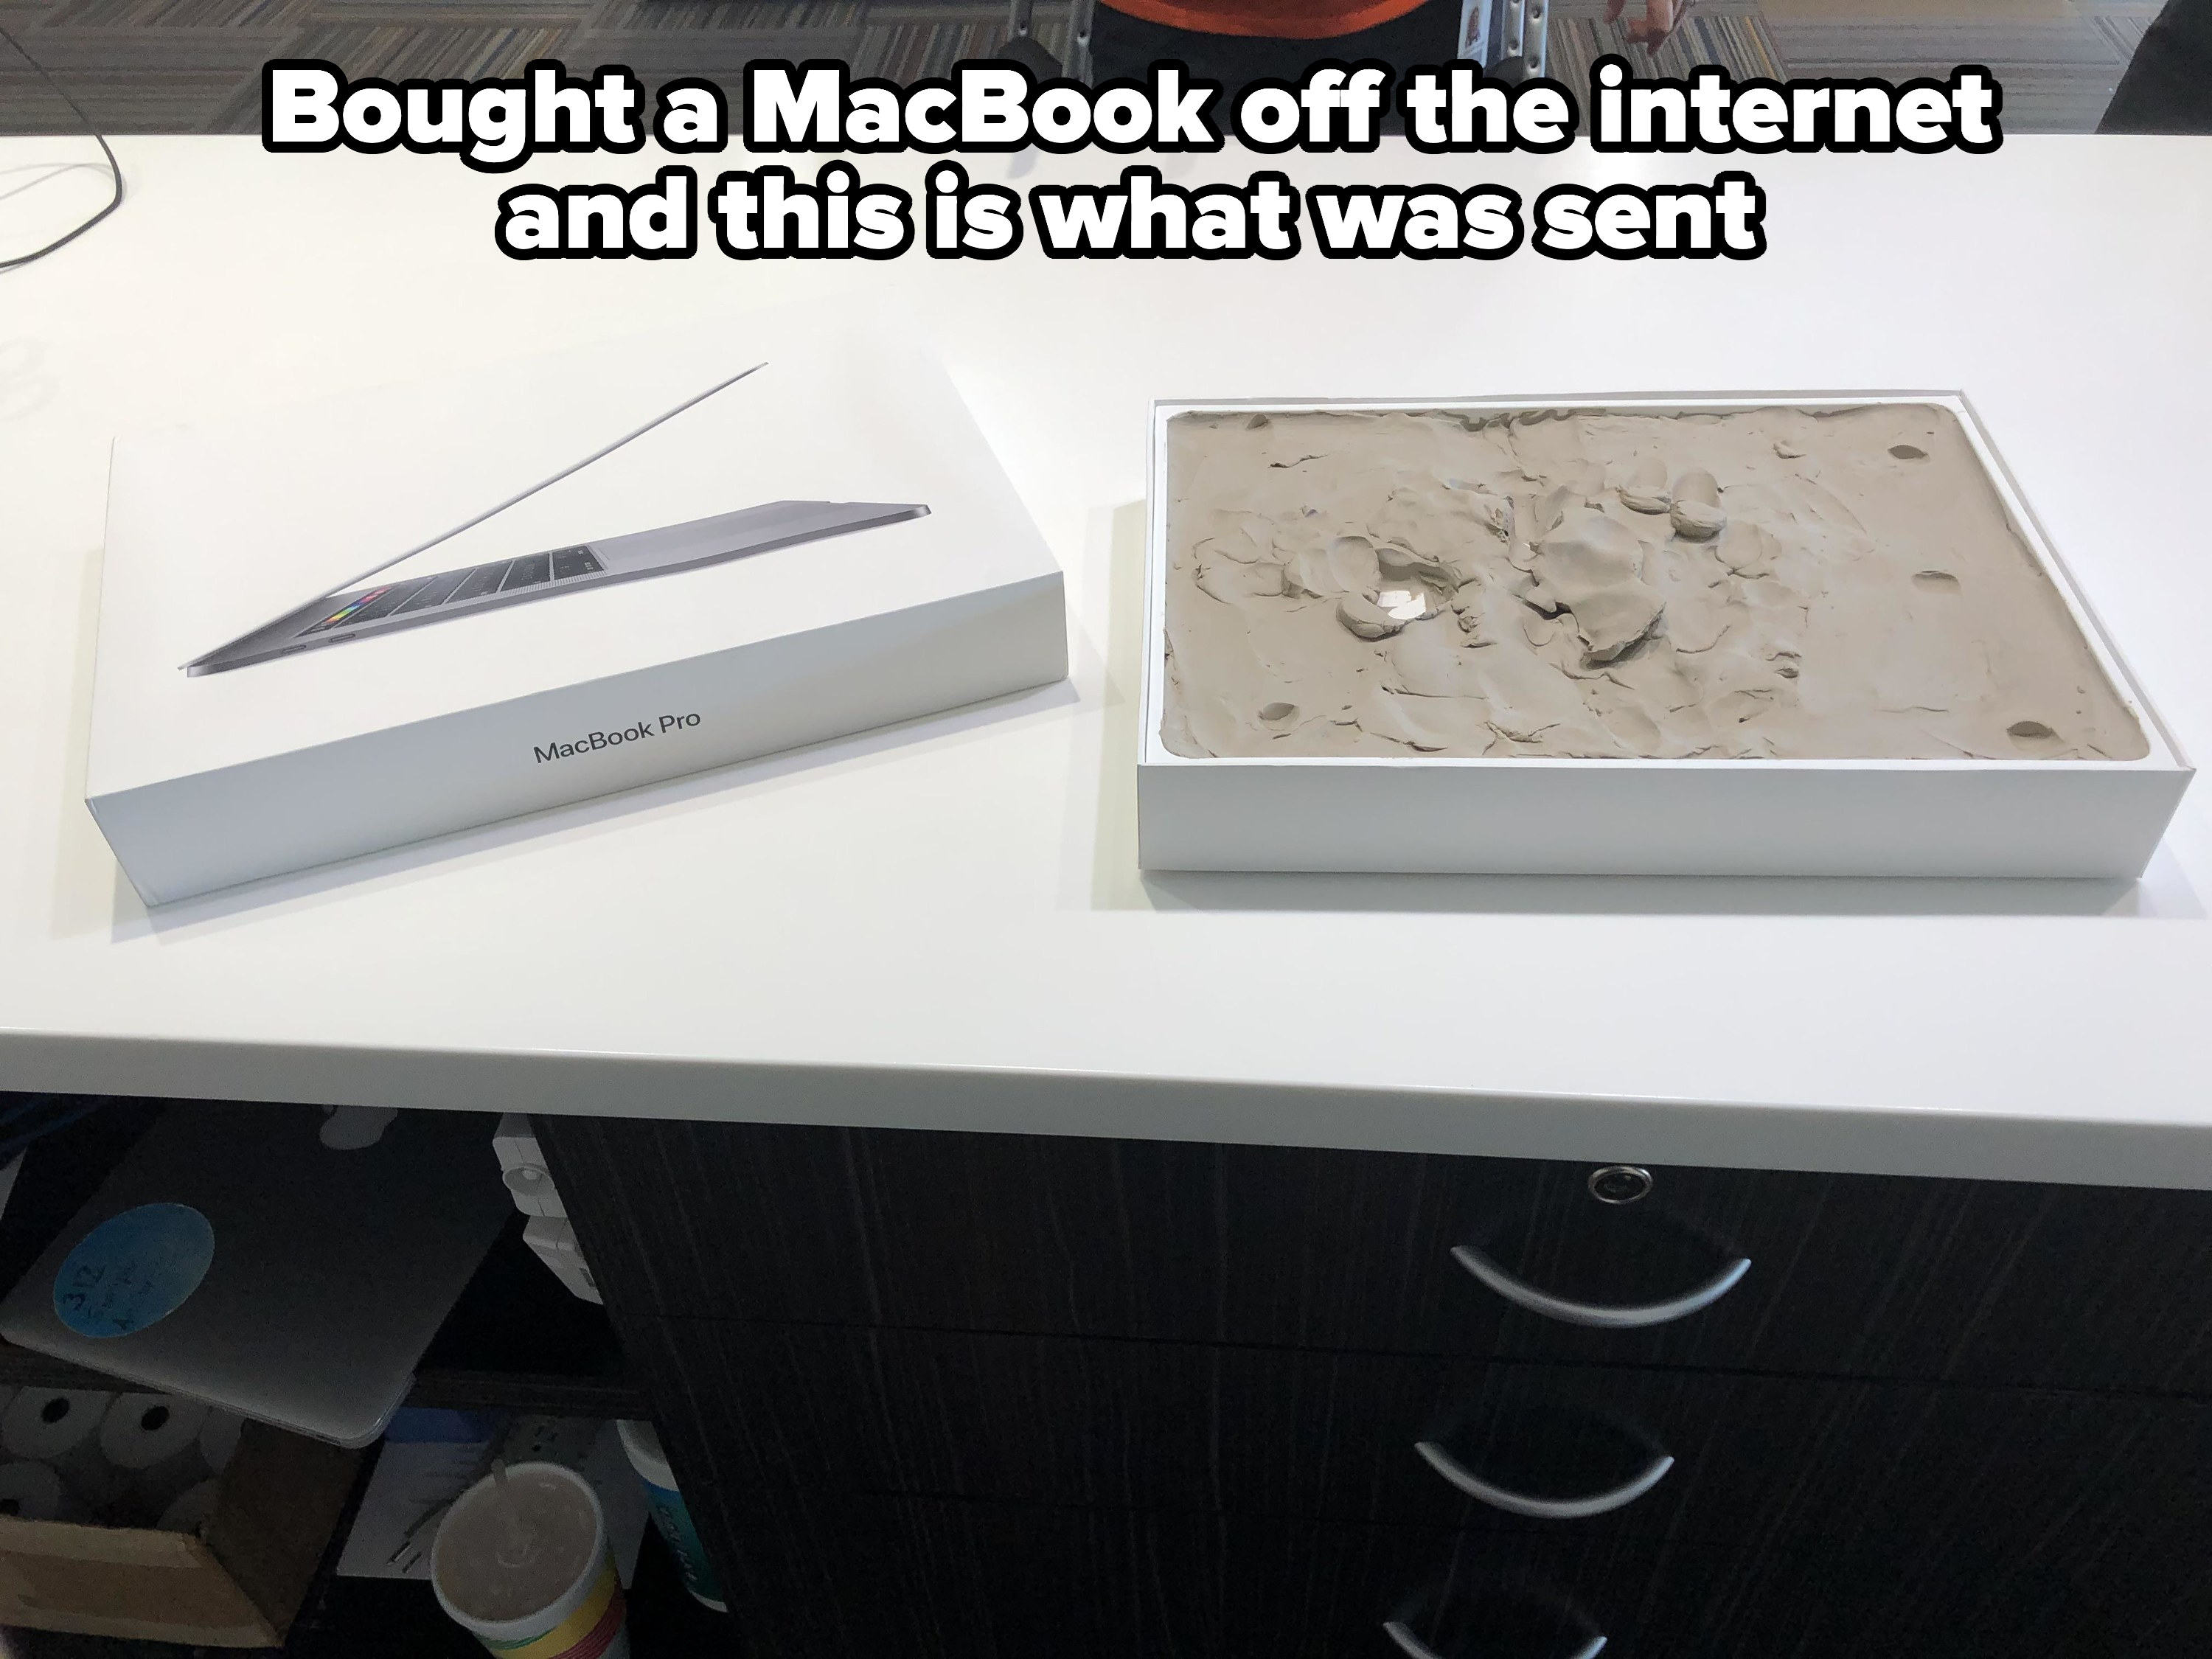 Clay instead of a new Macbook